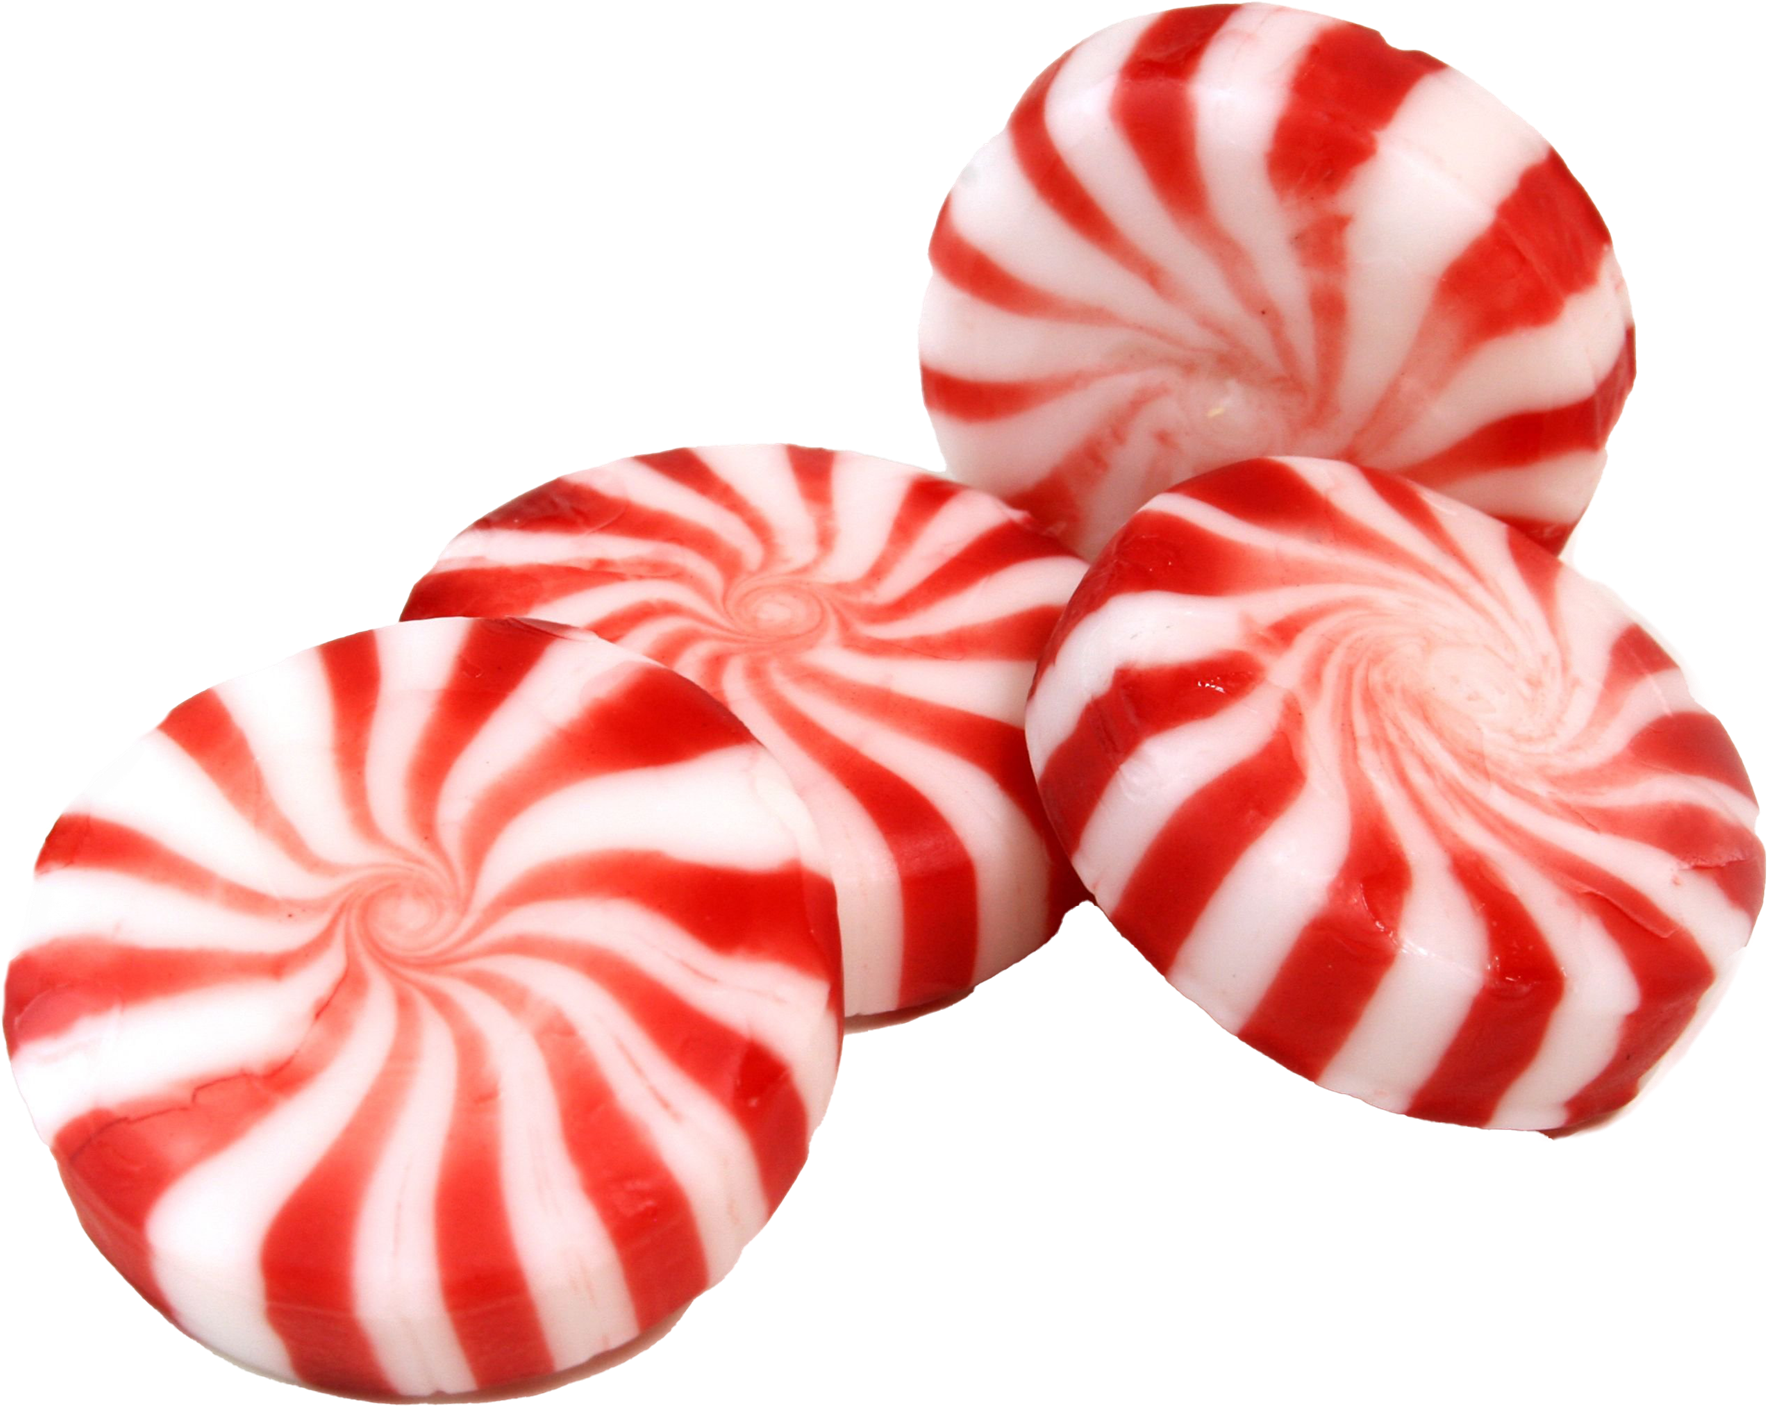 A Group Of Red And White Striped Candy